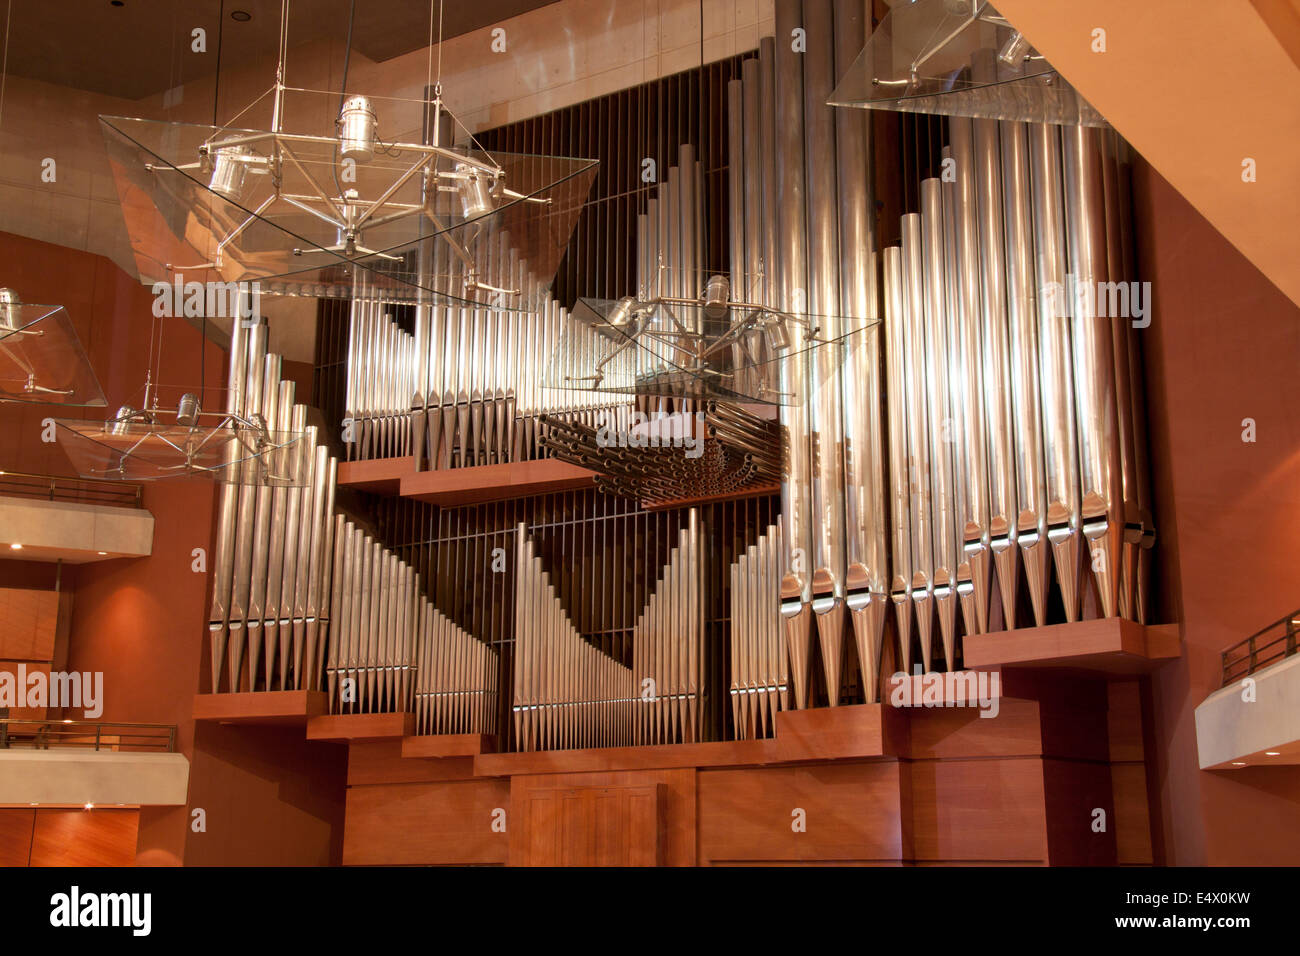 Organ pipes at the Bridgewater Hall concert venue in Manchester, UK. Stock Photo